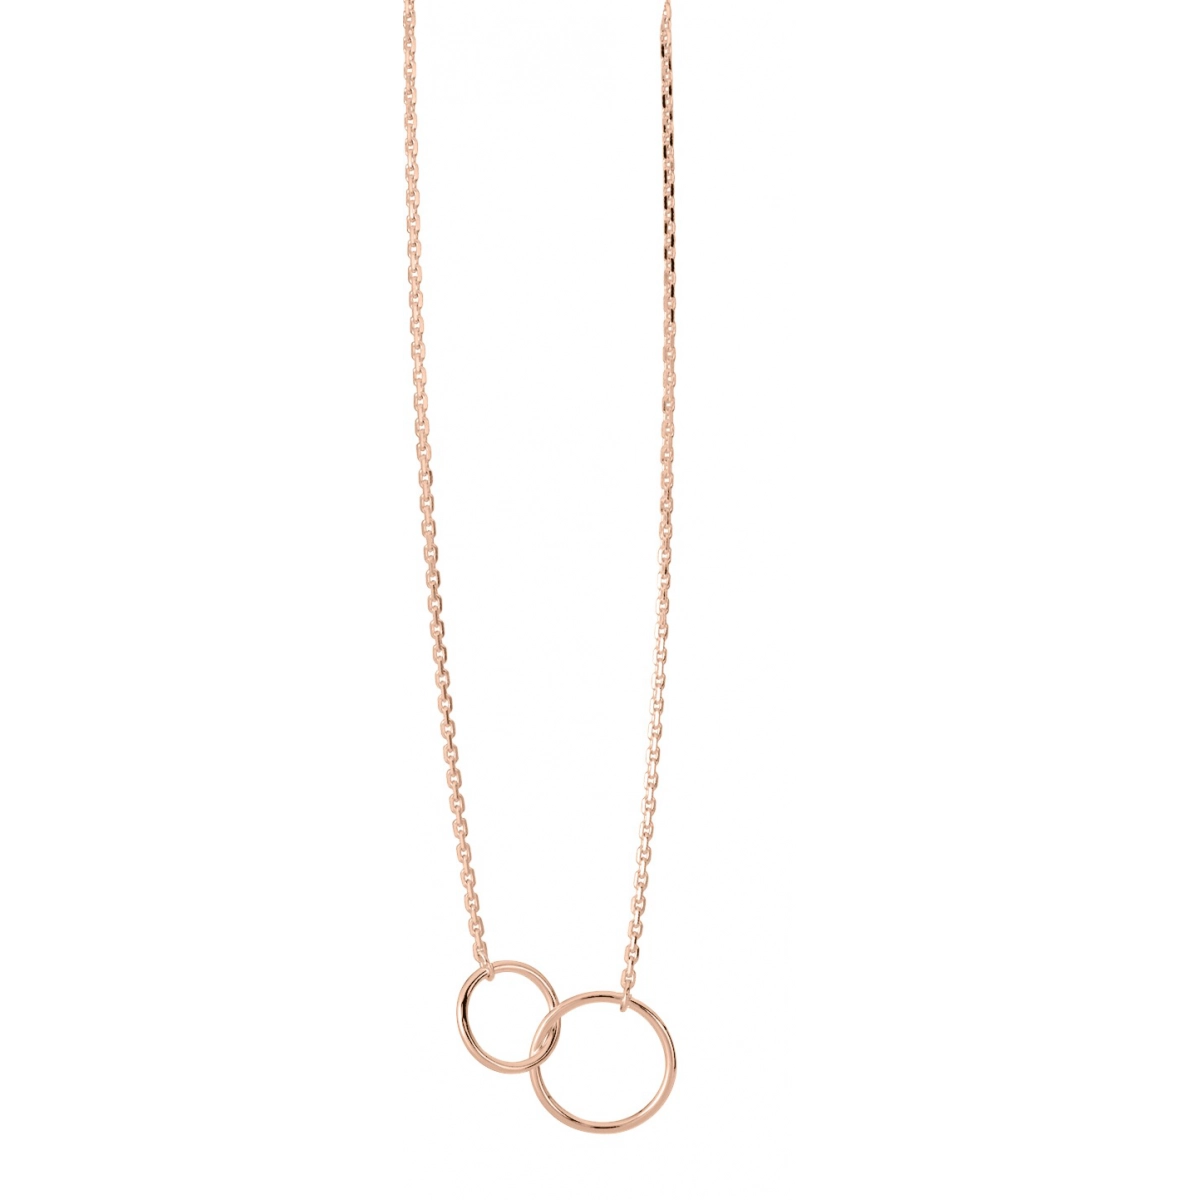 Collier plaqué or rose - Taille: 42  Lua Blanca  132072.R.42